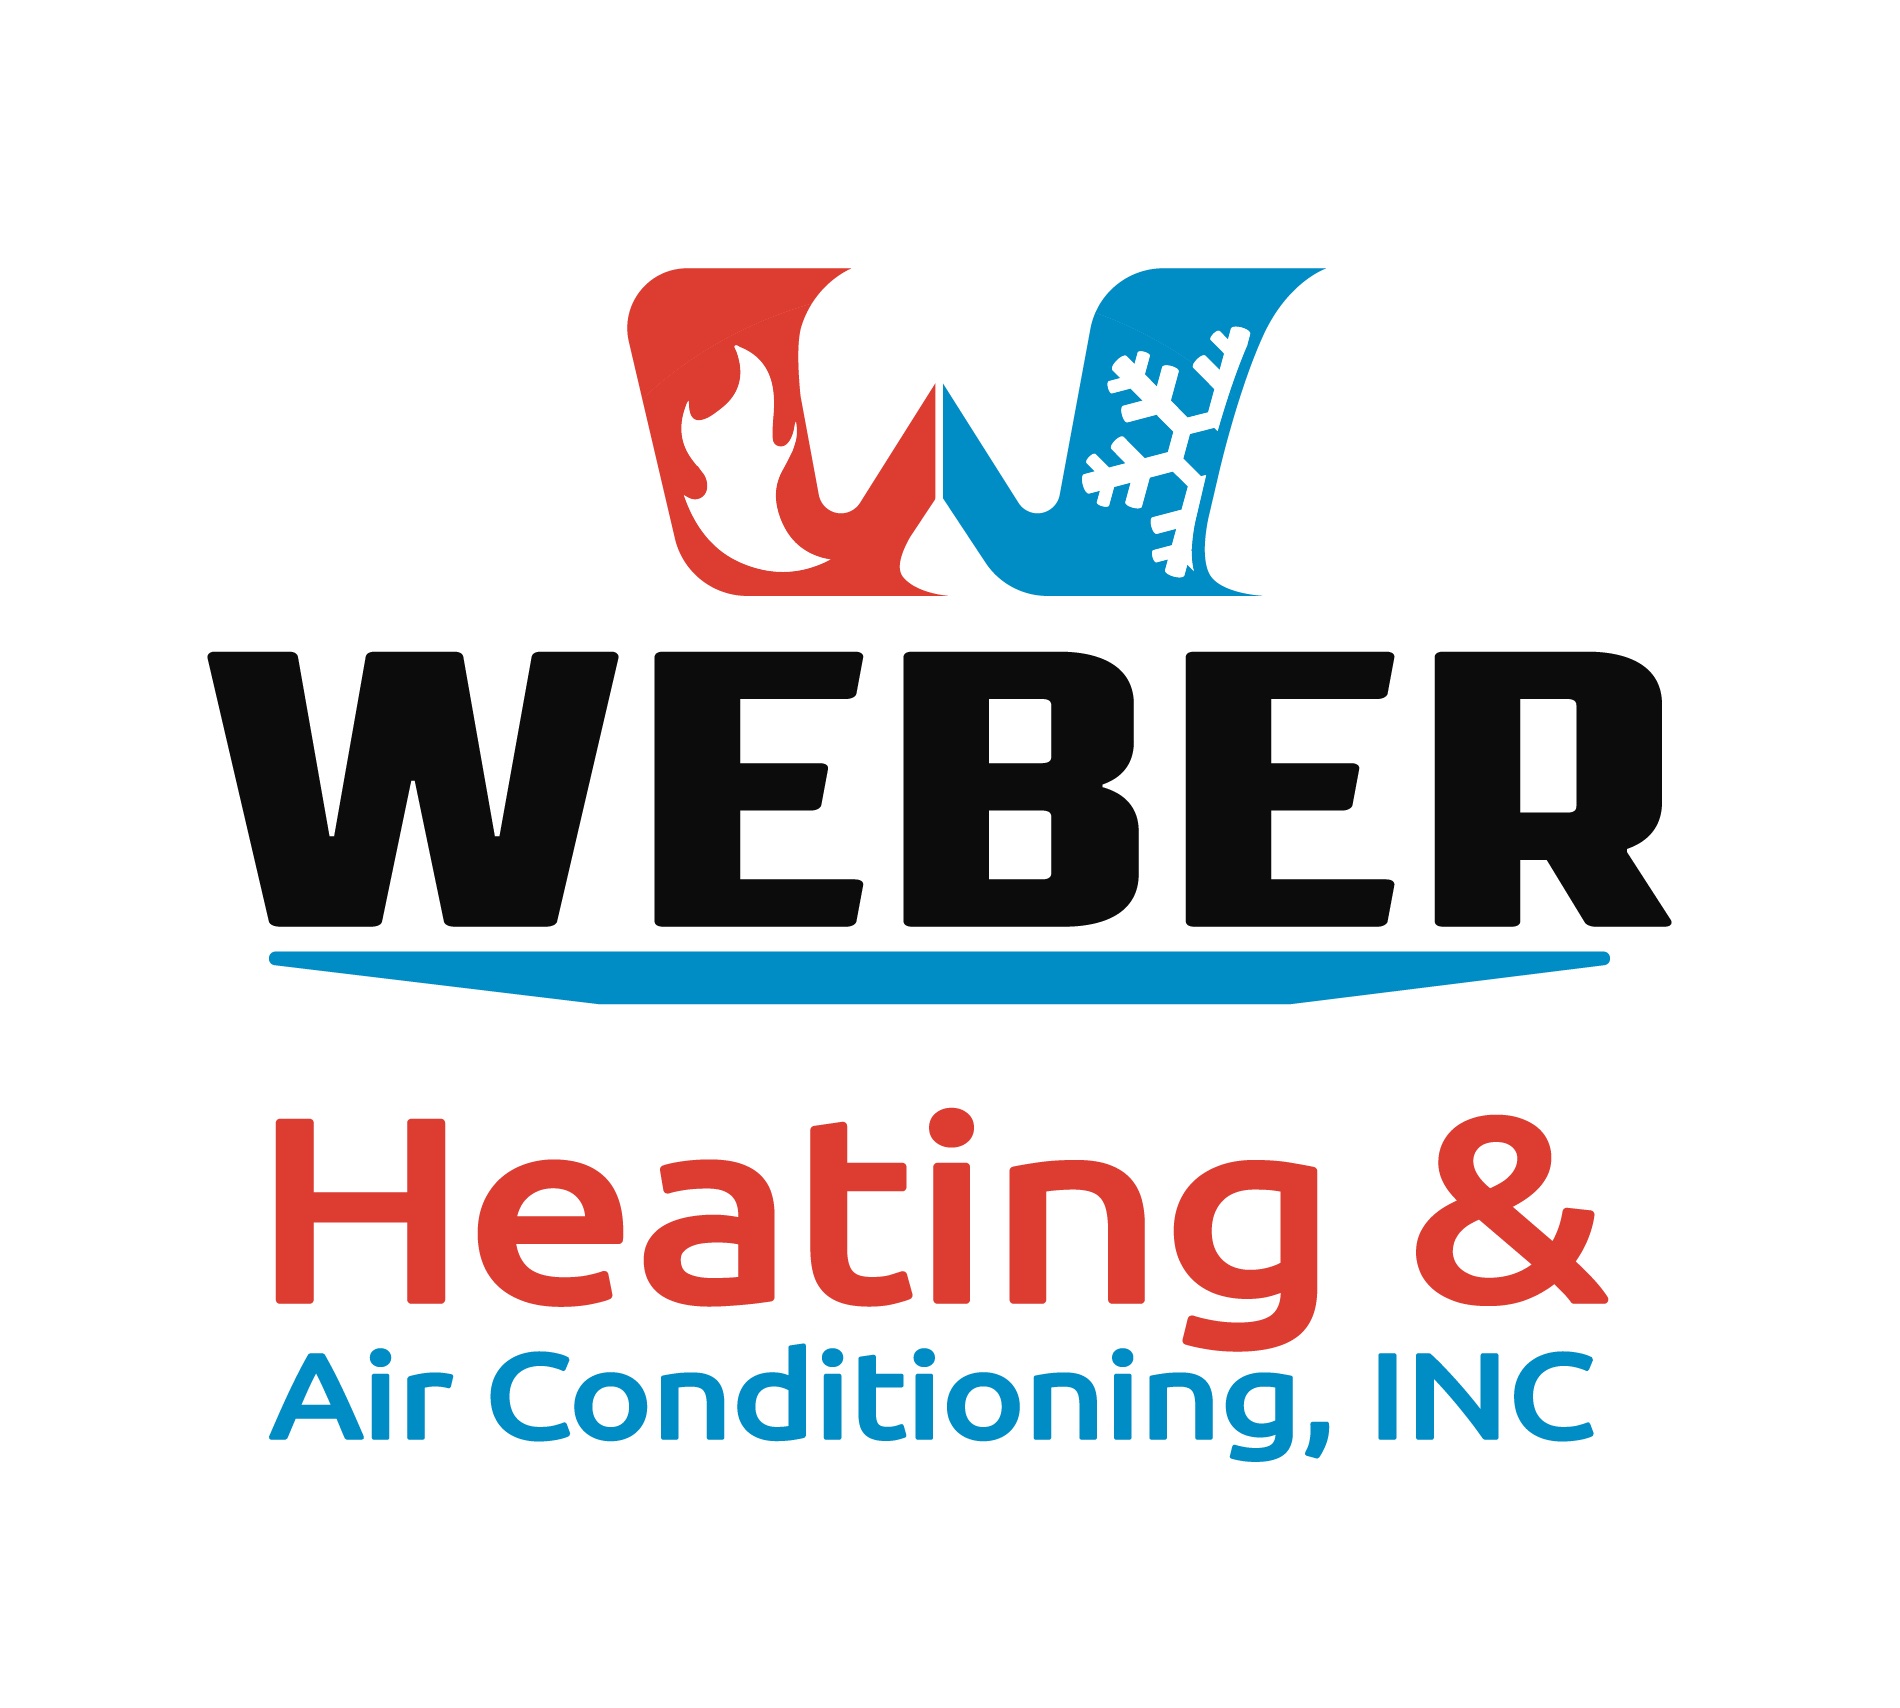 Weber Heating & Air Conditioning Inc